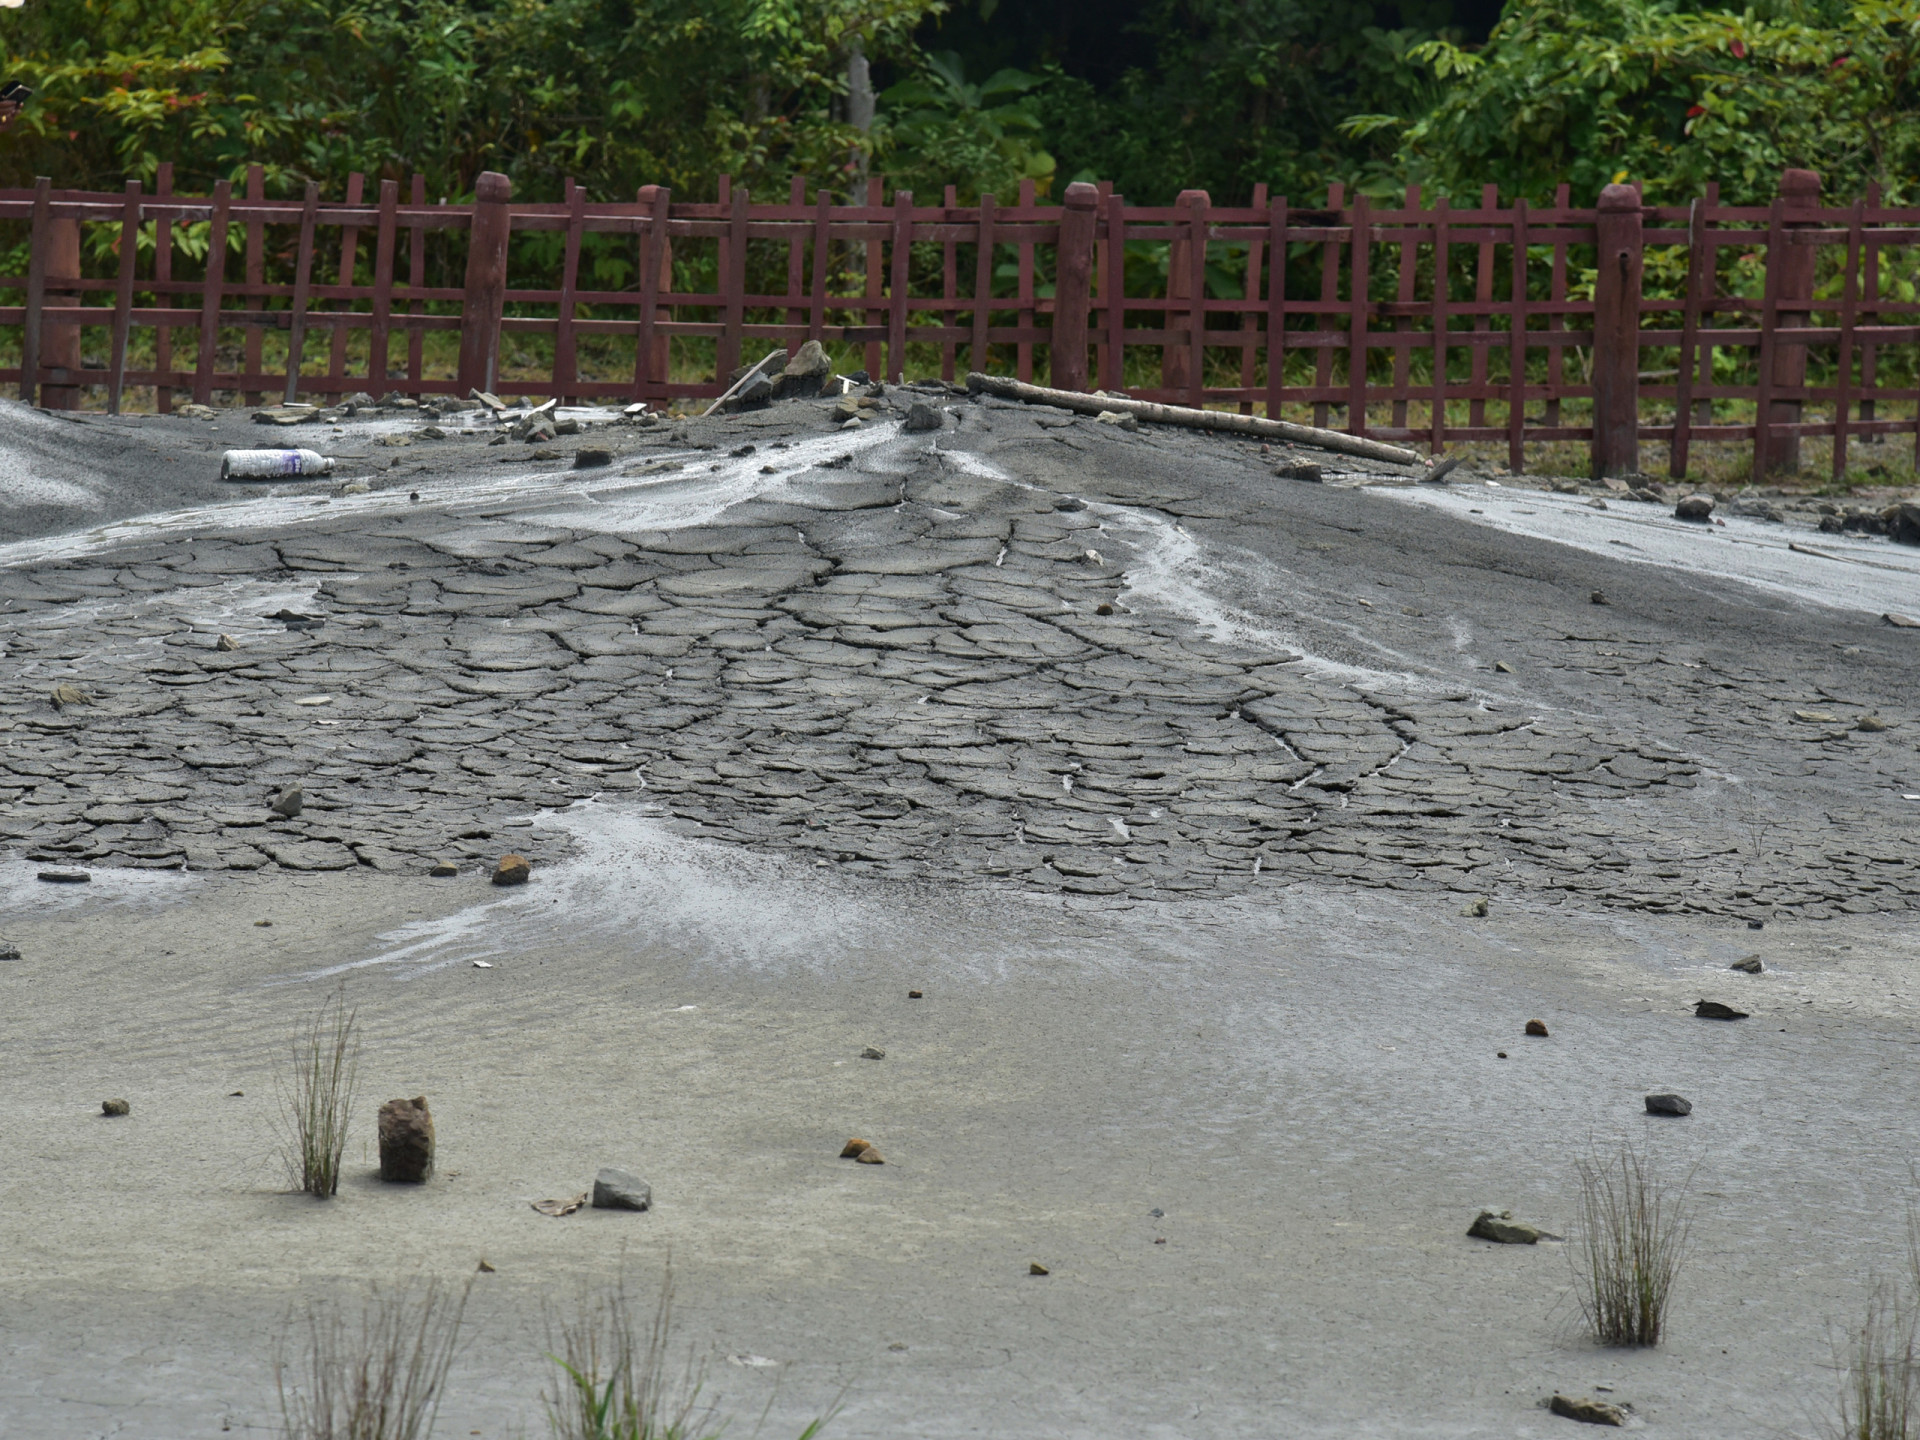 <p>Baratang, which belongs to the Great Andaman Chain, contains the only known examples of mud volcanoes in India.</p><p>You may also like:<a href="https://www.starsinsider.com/n/484321?utm_source=msn.com&utm_medium=display&utm_campaign=referral_description&utm_content=689150en-nz"> Iconic movie characters with surprisingly little screen time</a></p>